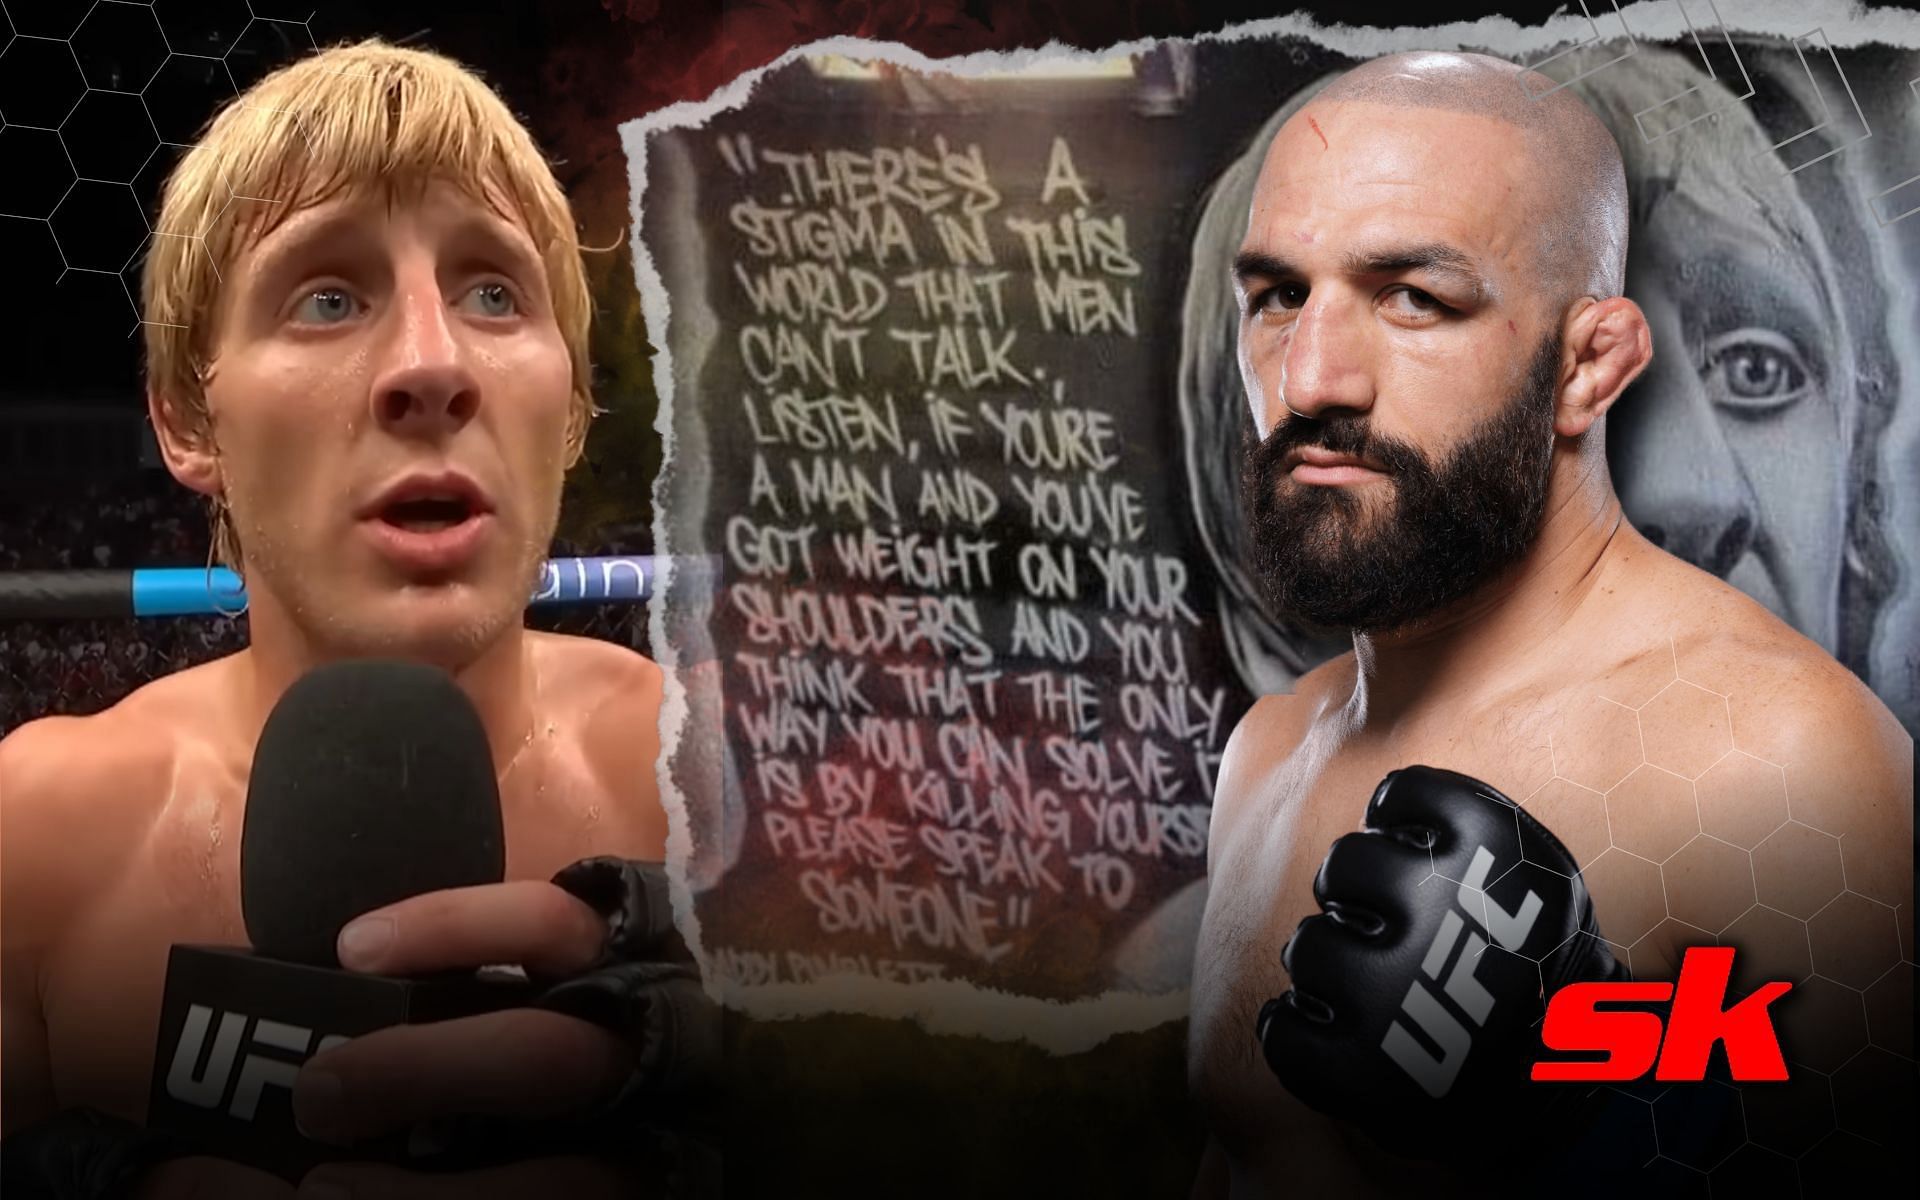 Jared Gordon hopes to raise awareness with potential Paddy Pimblett fight. [Image credits: @theufcbaddy on Instagram; @UFC on YouTube; getty images.]